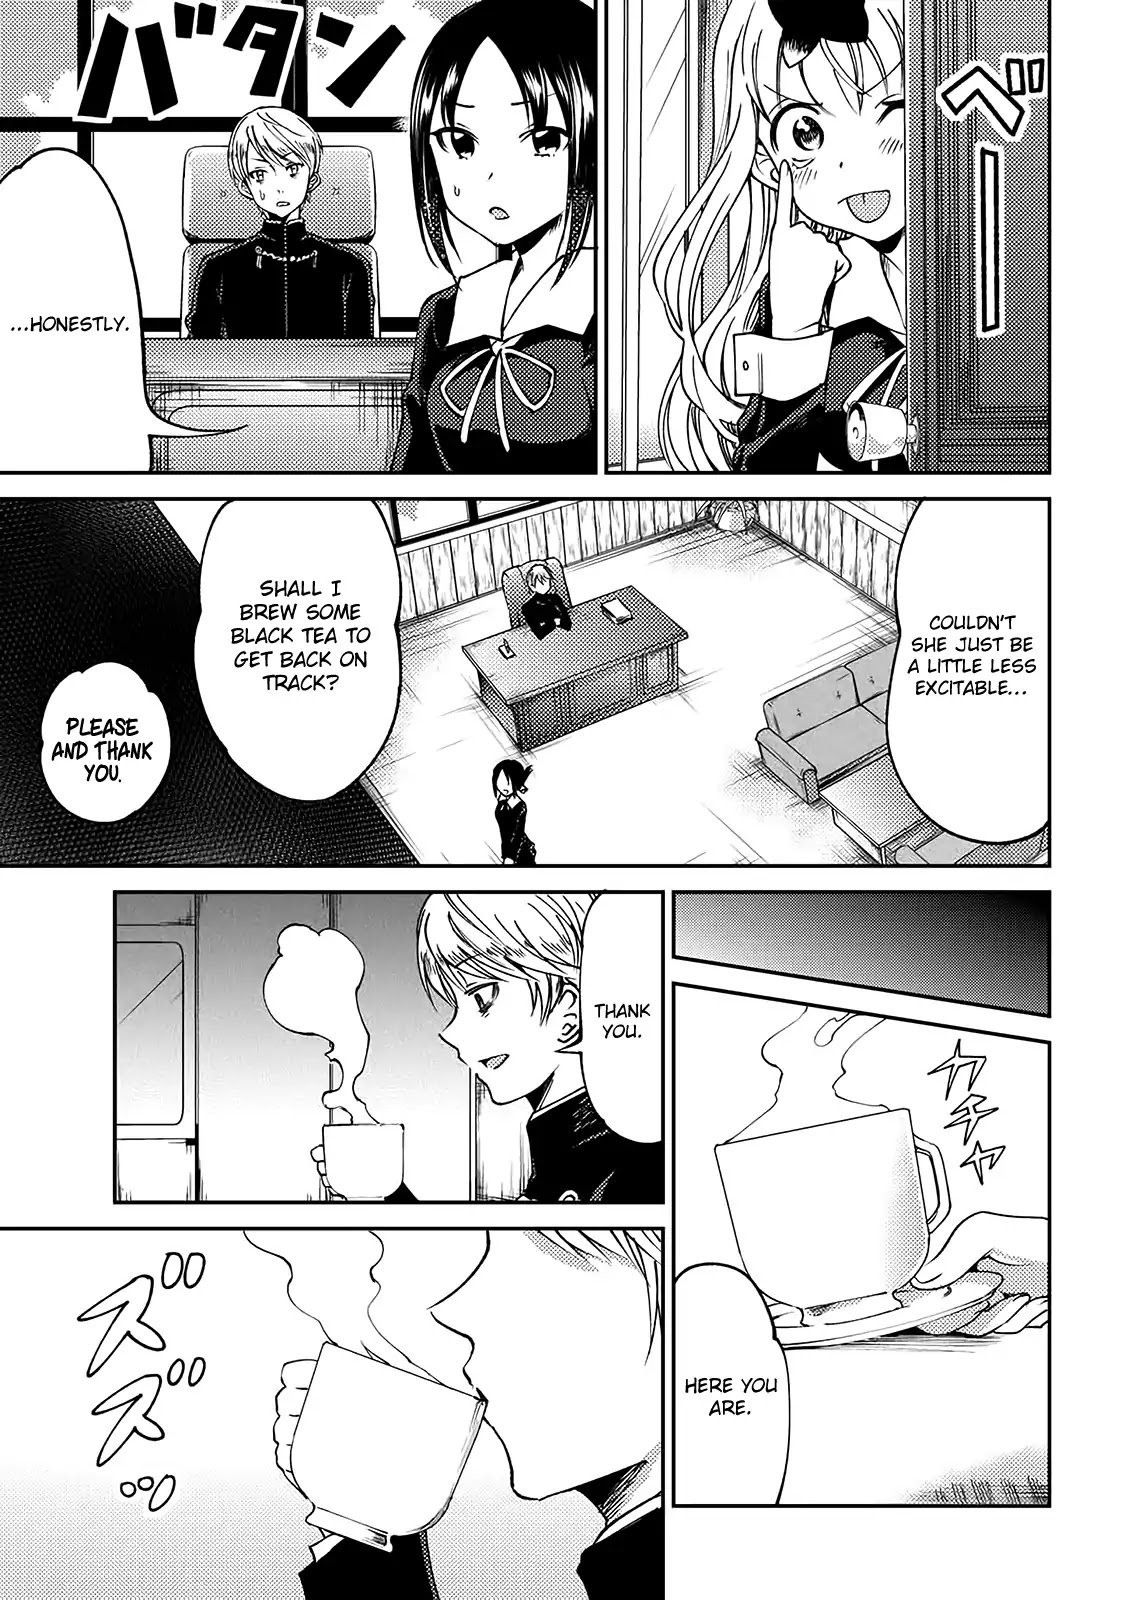 kaguya-wants-to-be-confessed-to-official-doujin-chap-3-8